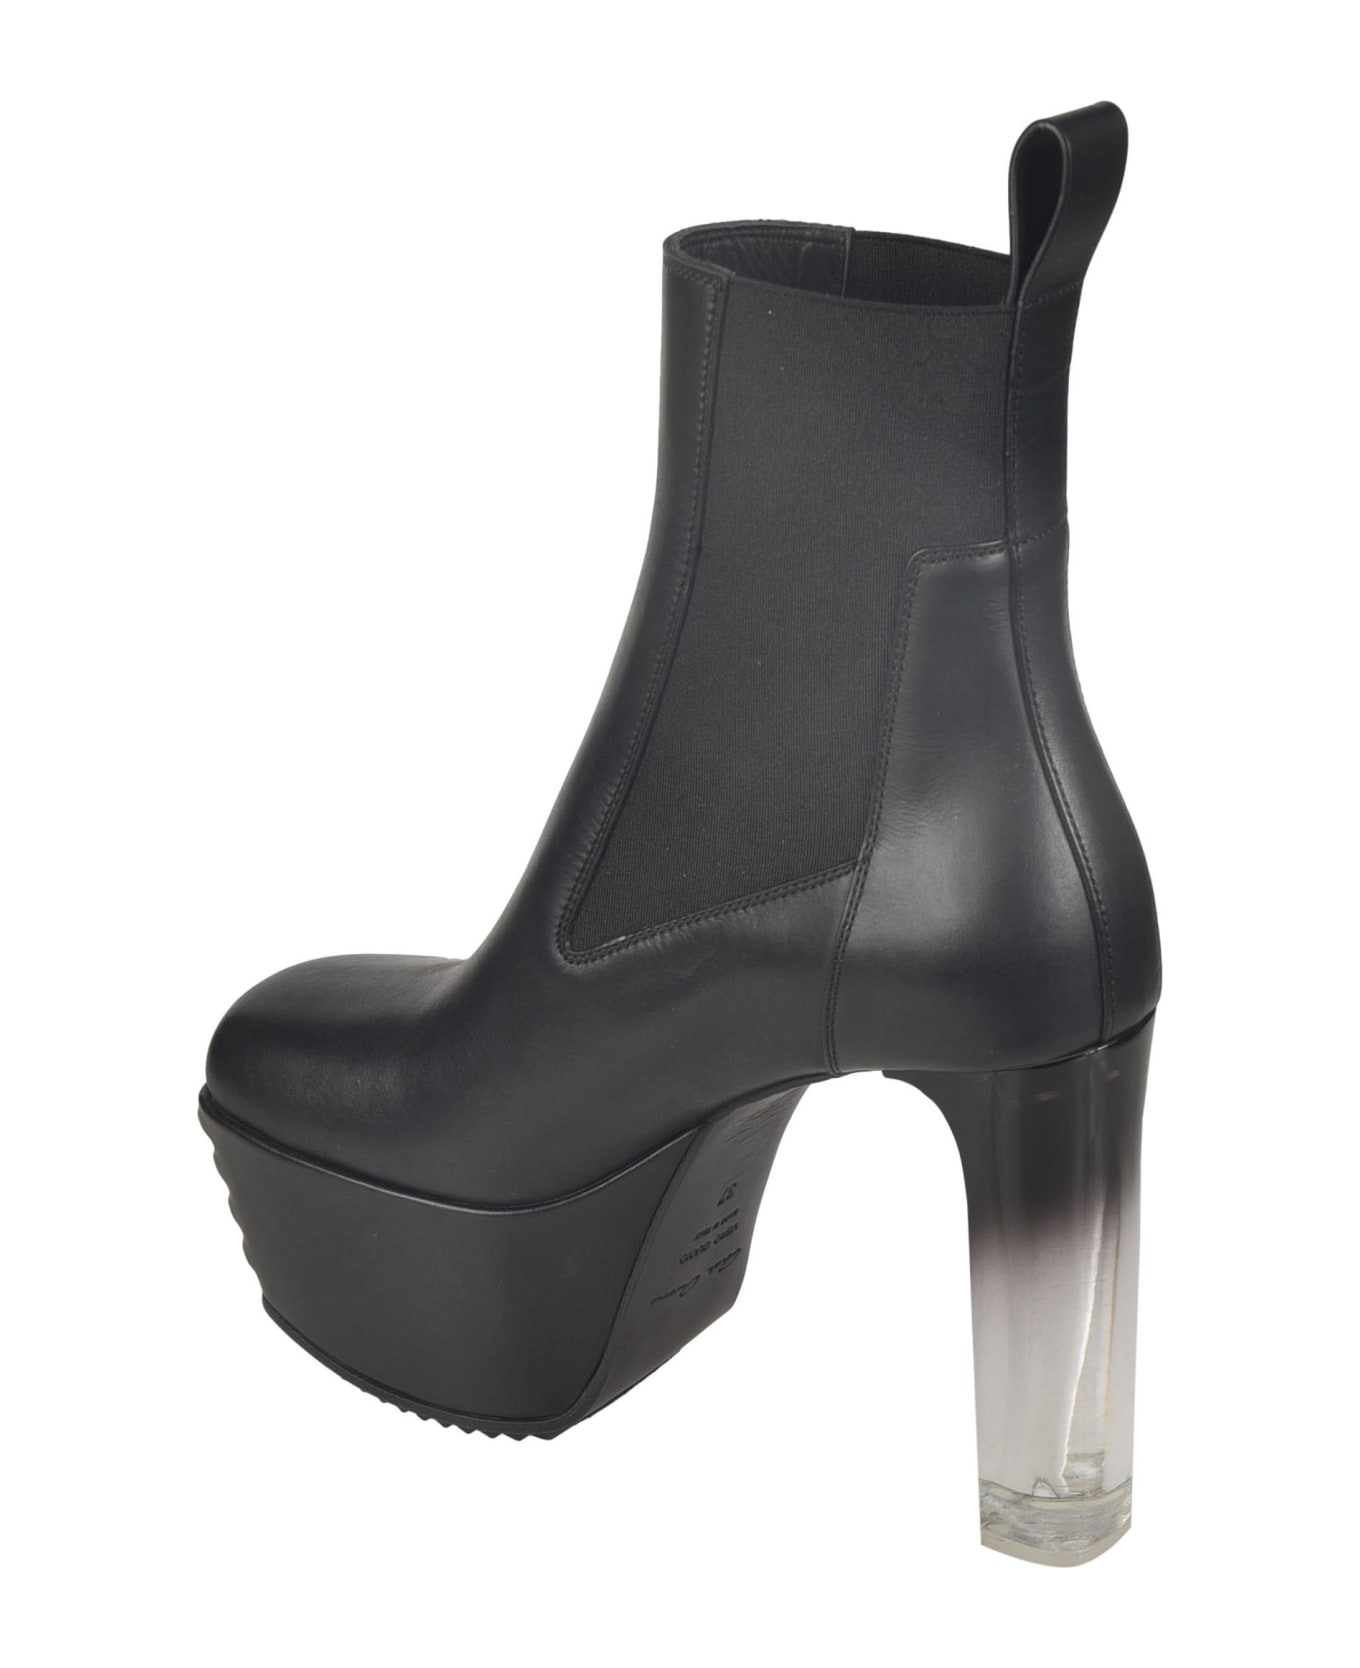 Rick Owens Open Toe Minimal Grill Beatle Boots - Black/Clear